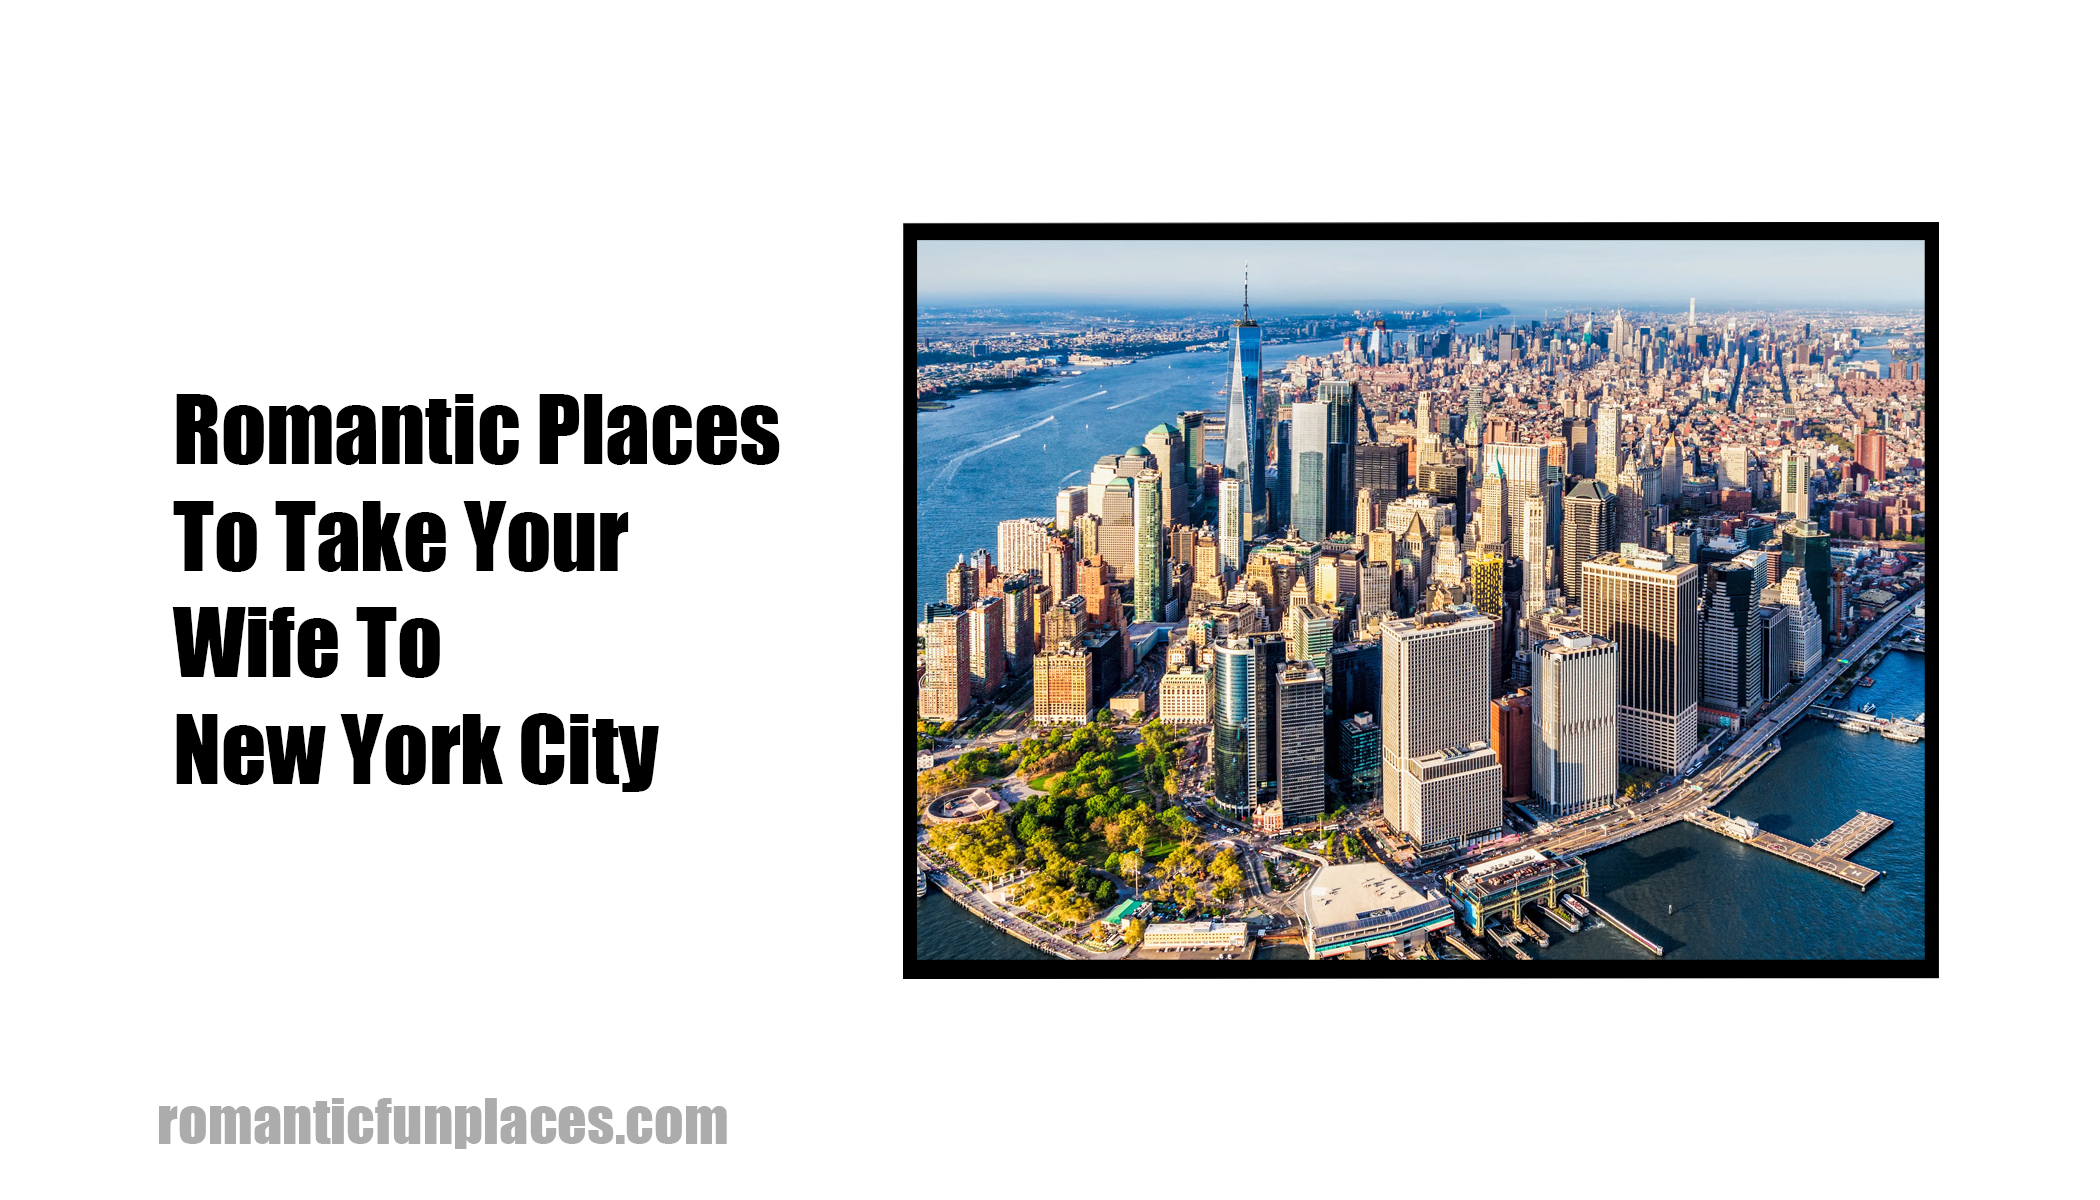 Romantic Places To Take Your Wife To New York City